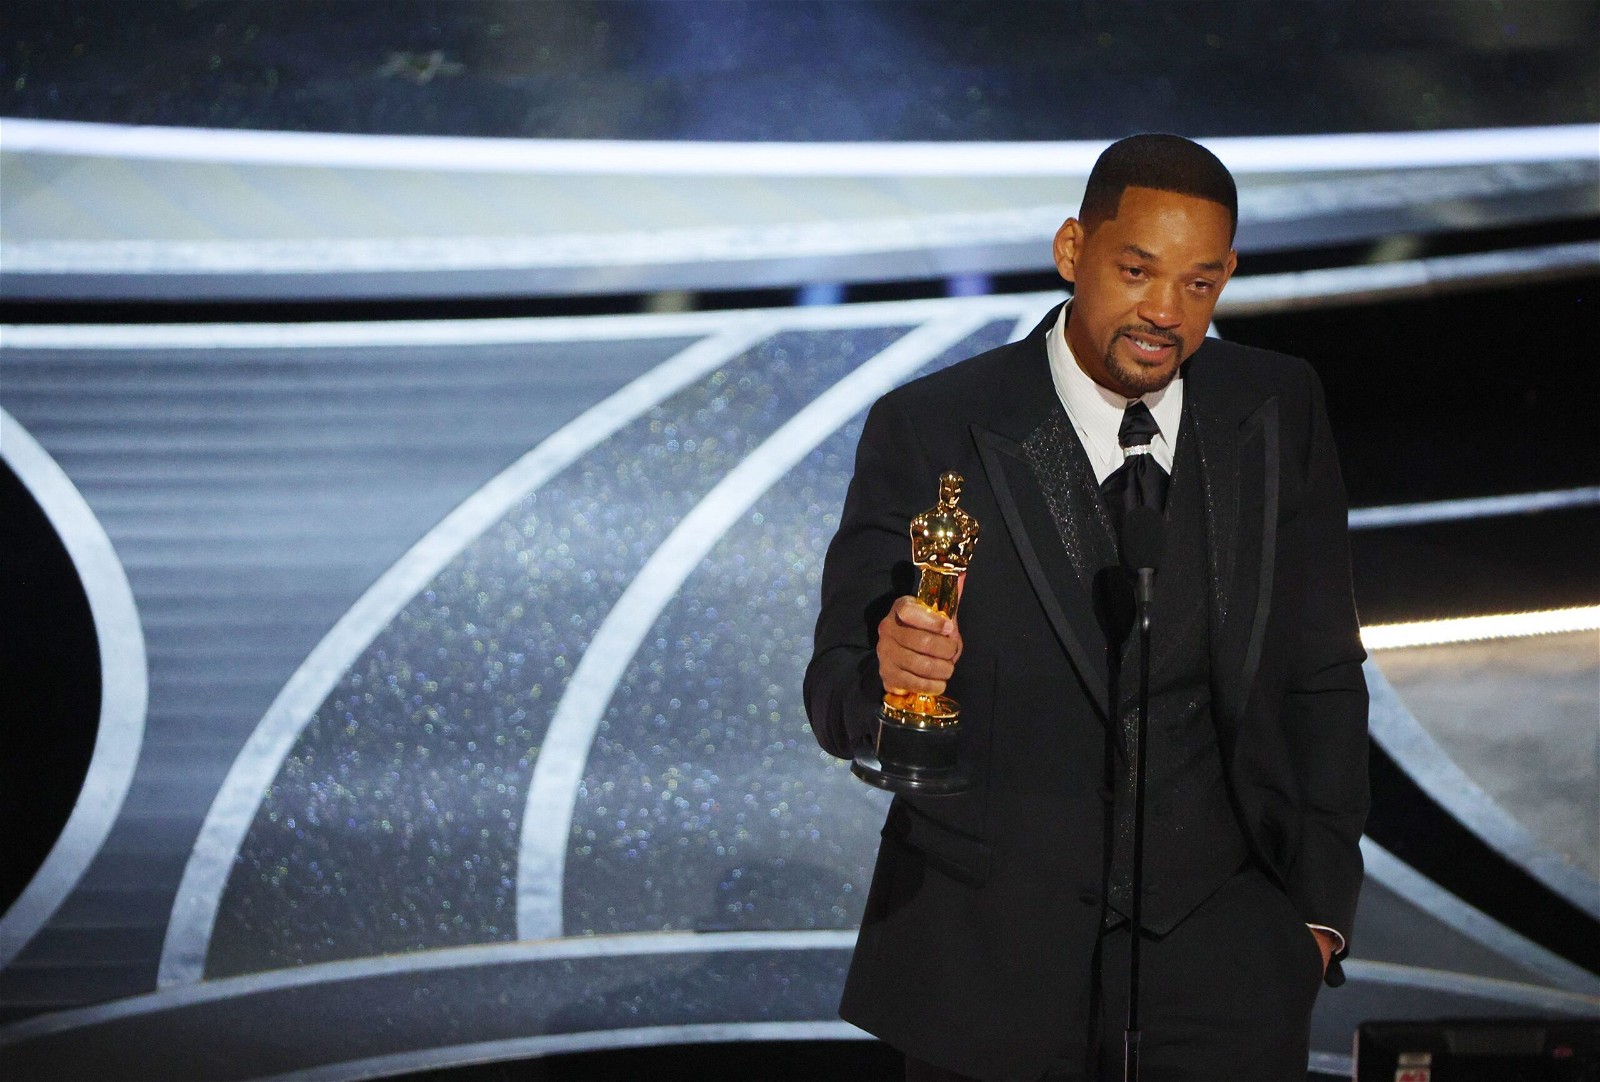 Will Smith for Best Actor in "King Richard" at 2022 Academy Awards Ceremony. Credits: REUTERS